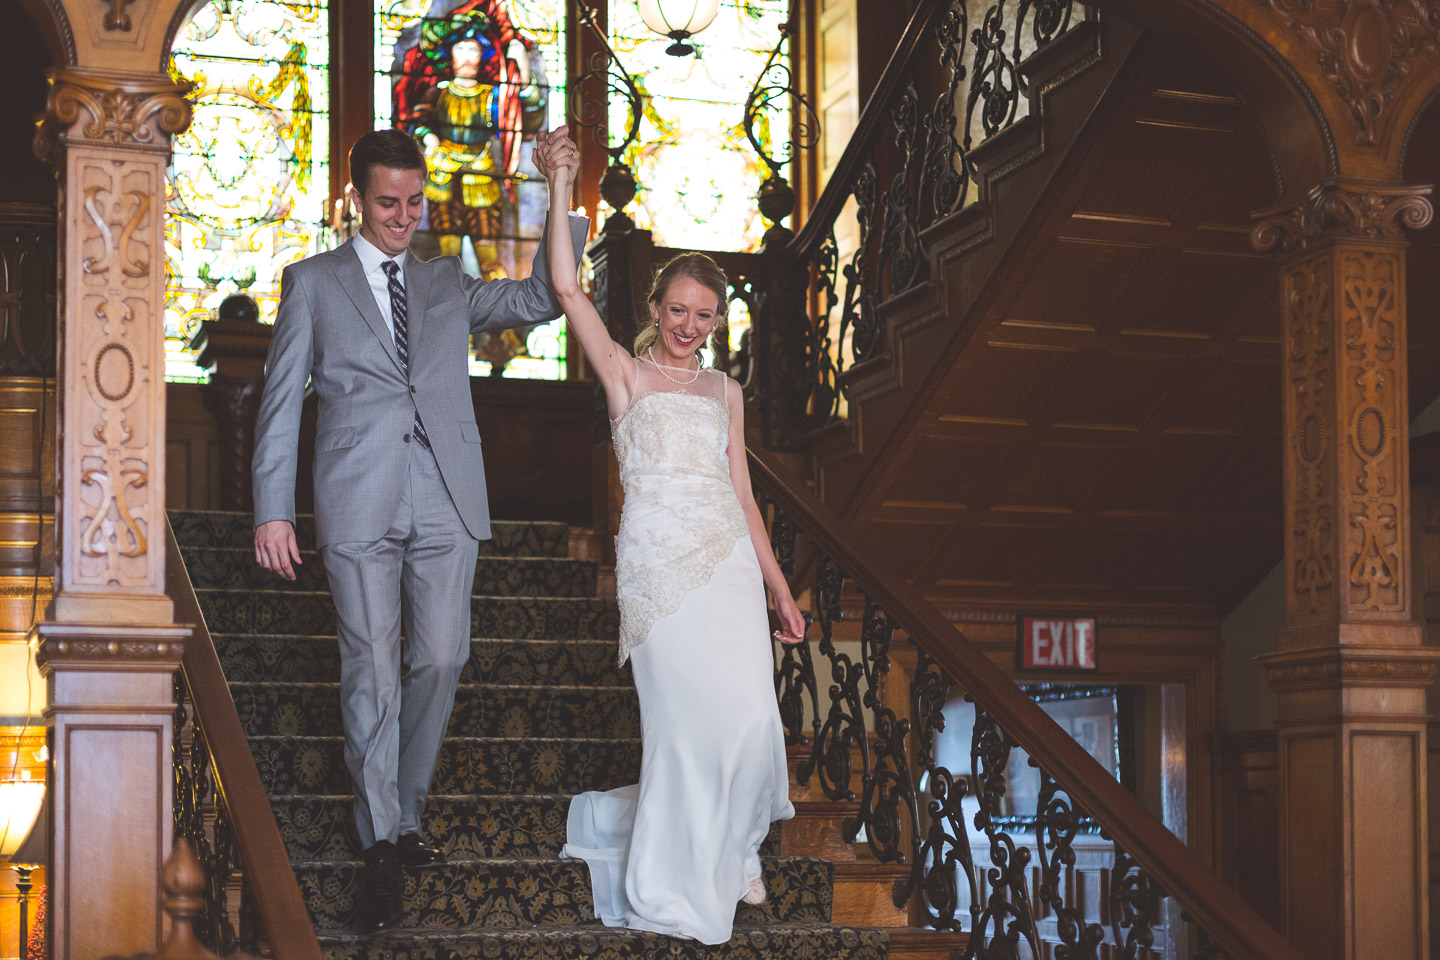 Wedding-Bride-Groom-Grand-Entrance-Stairs-The-Whitney-Detroit-Michigan-Midtown